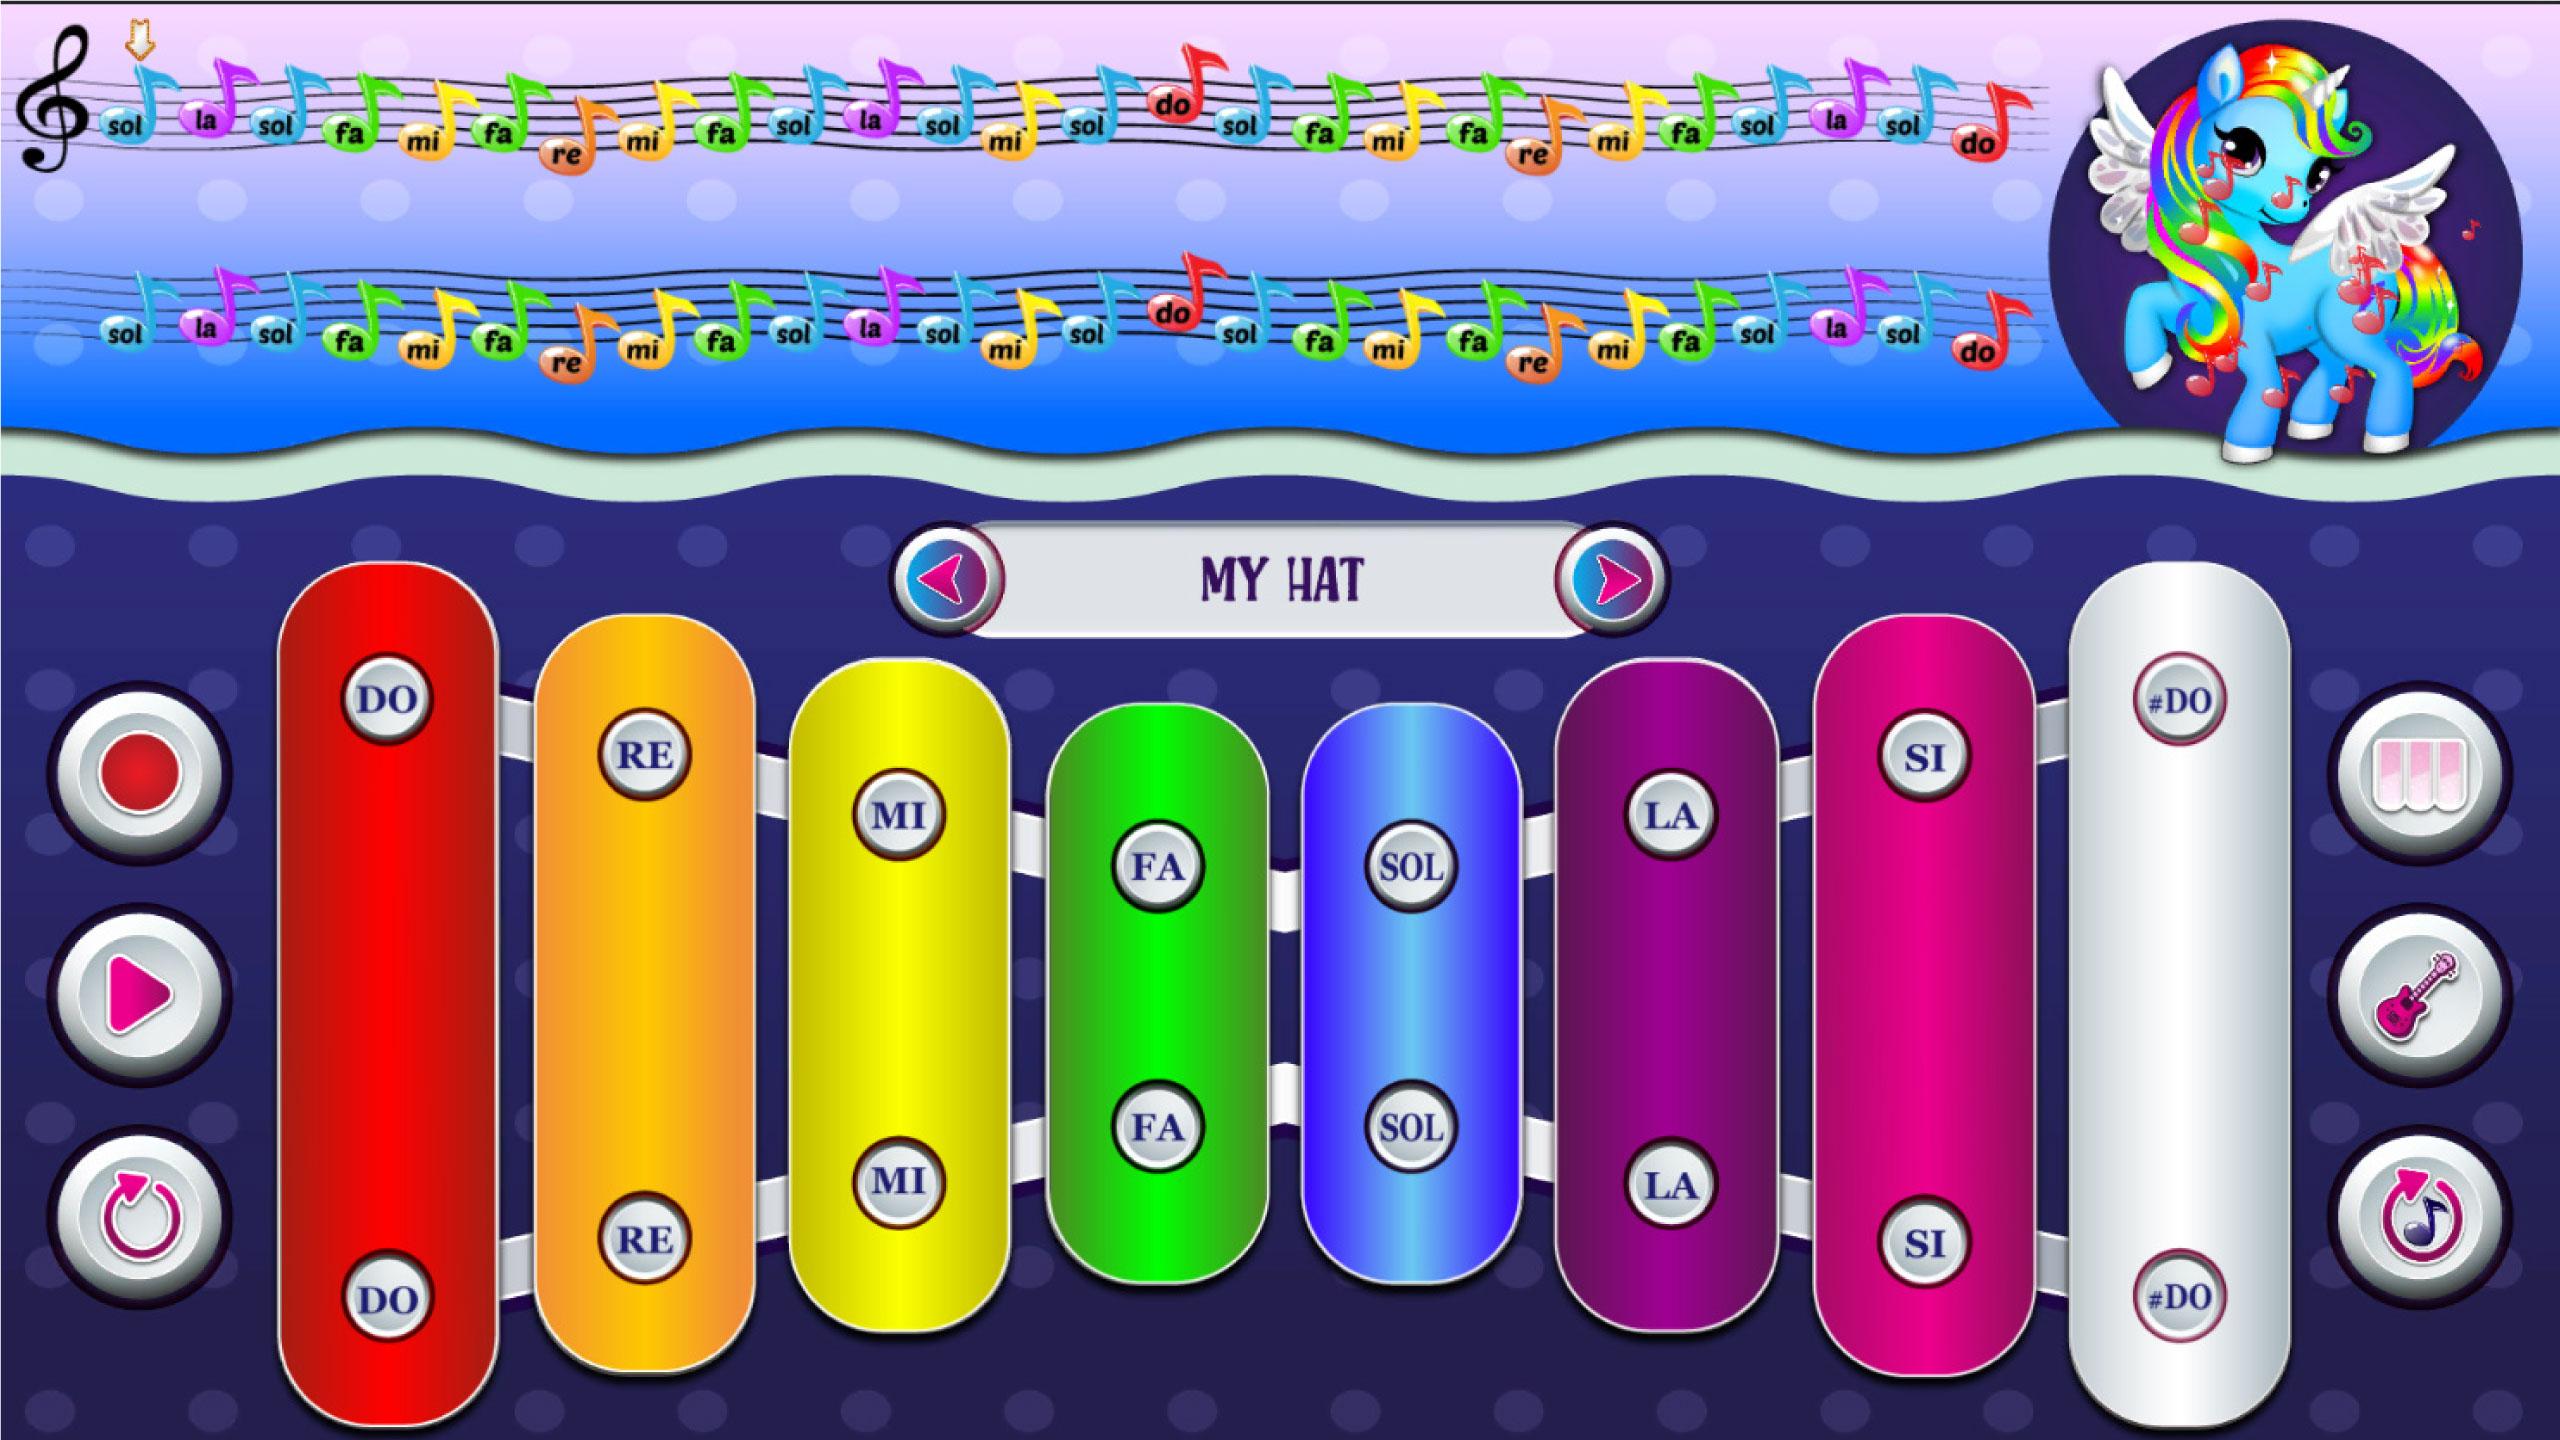 My Colorful Litle Pony Instrument - Piano 2.0 Screenshot 3